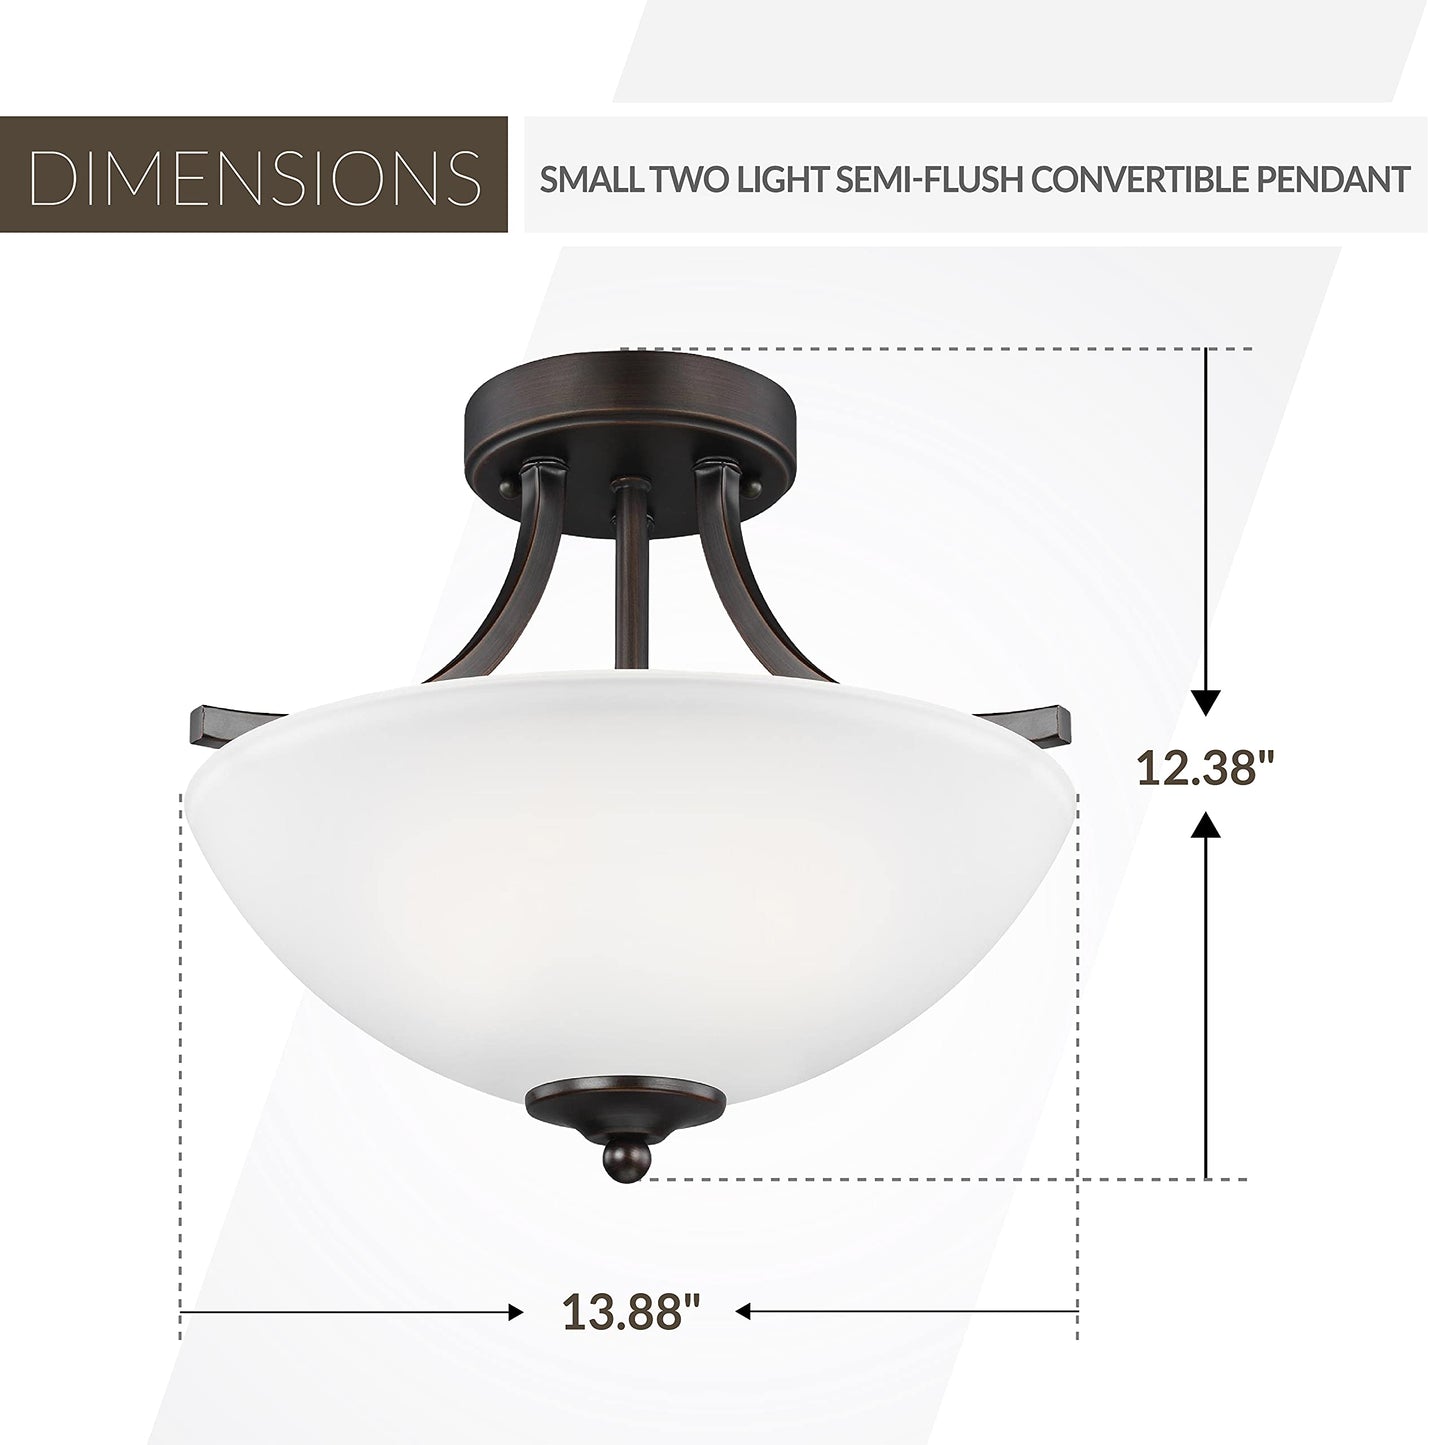 Generation Lighting 7716502EN3-710 Transitional Two Light Semi-Flush Convertible Pendant from Seagull - Geary Collection in Bronze/Dark Finish, - Like New